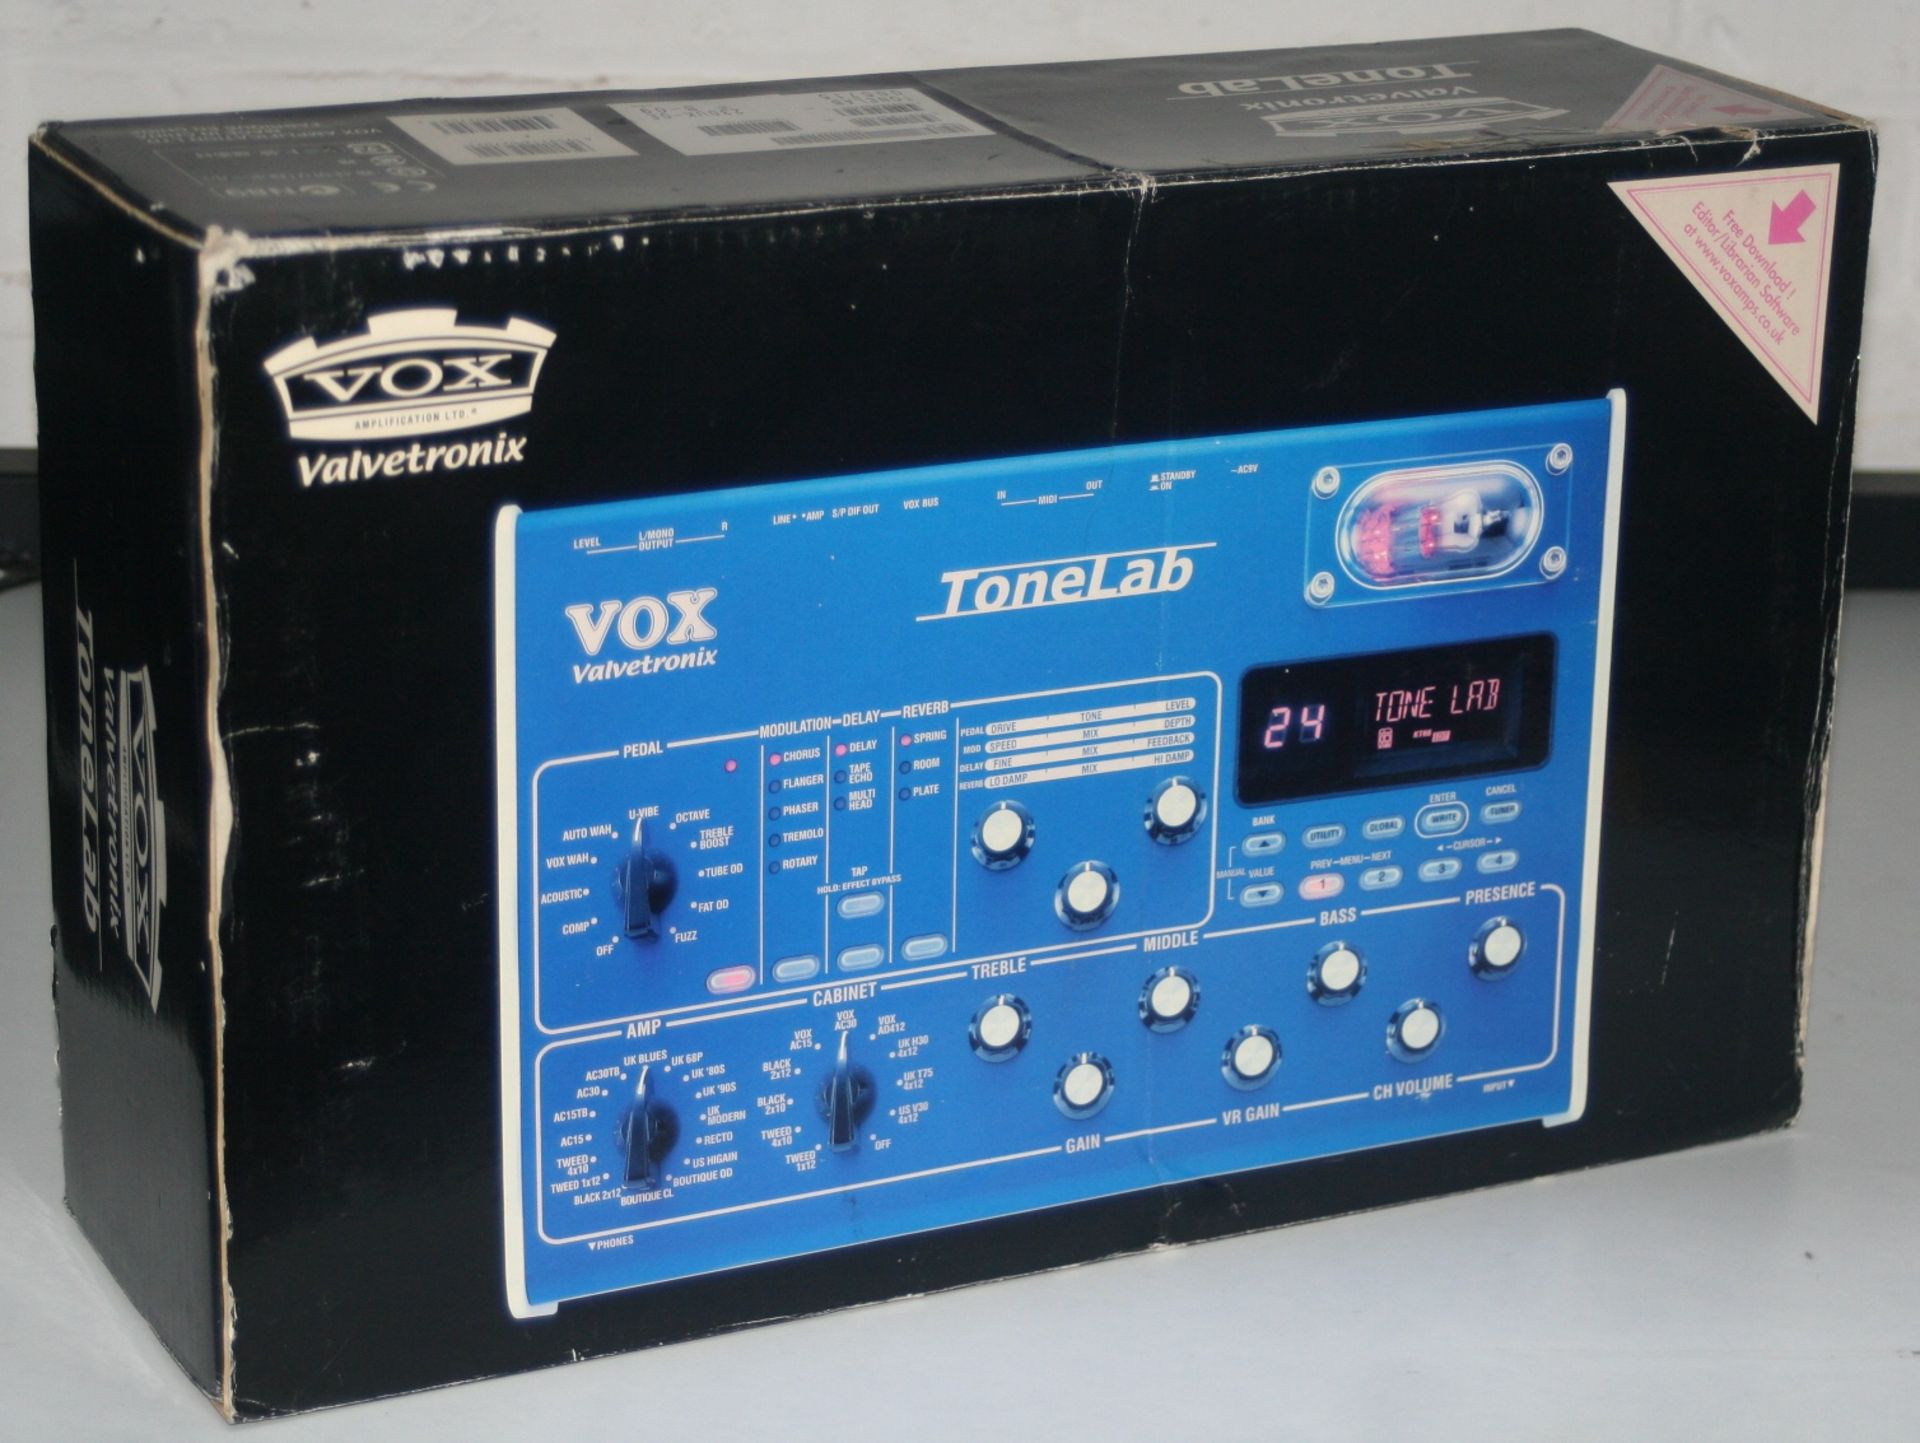 1 x Vox Valvetronix Tone Lab Guitar Amp Modelling Effects Unit – Ex Display Model – Boxed – Comes